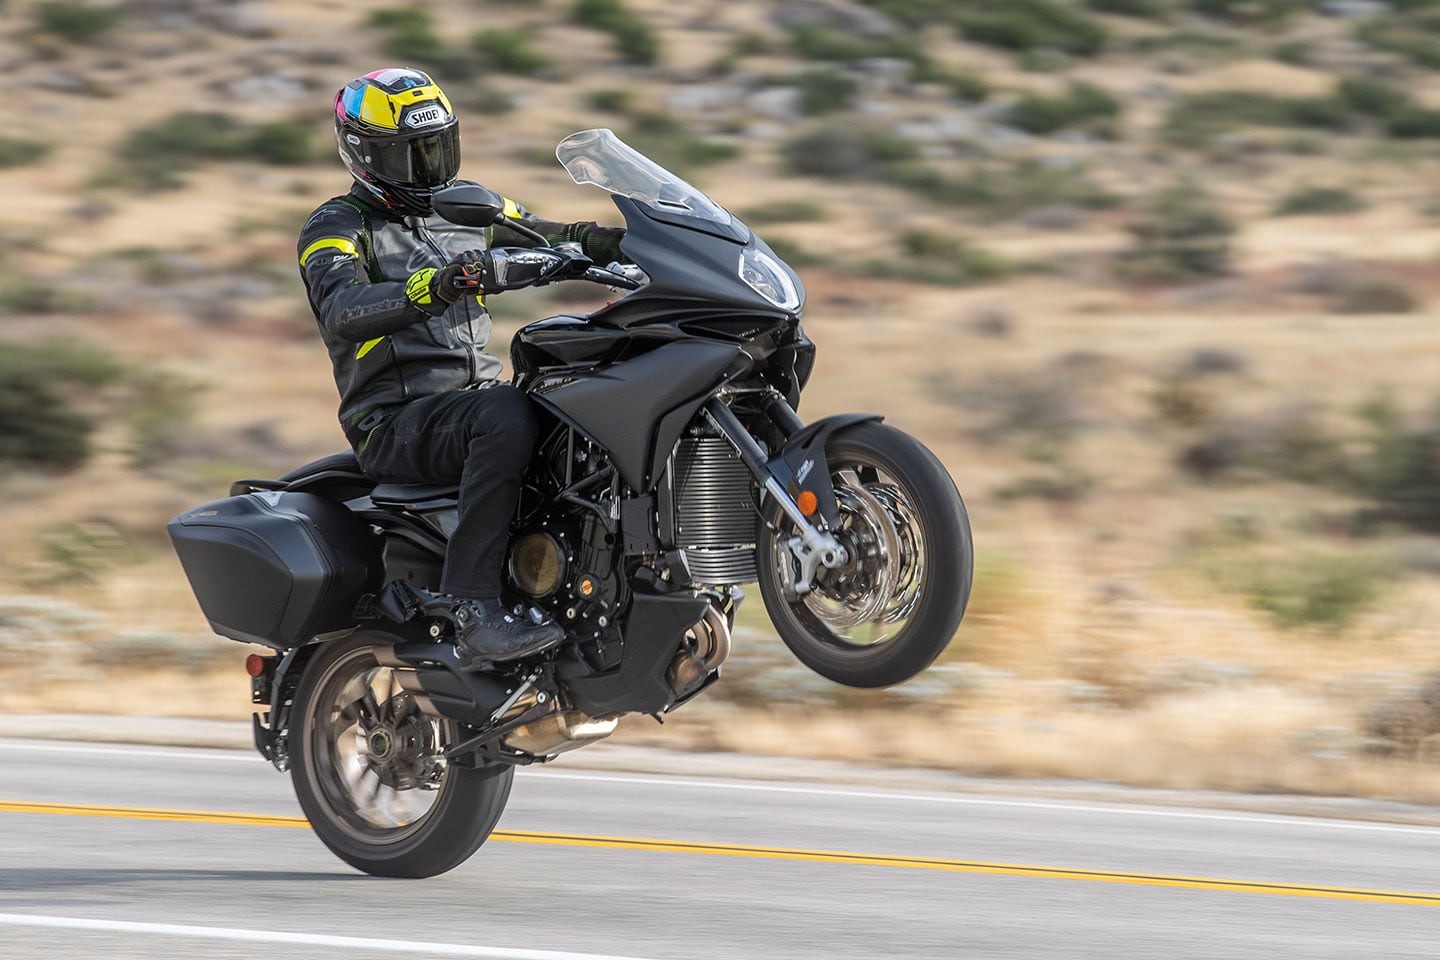 MV’s 798cc triple is a gem and lots of fun. Wheelies don’t come natural with the bike’s Smart Clutch System, but the front still picks up with ease when rider aids are turned off.